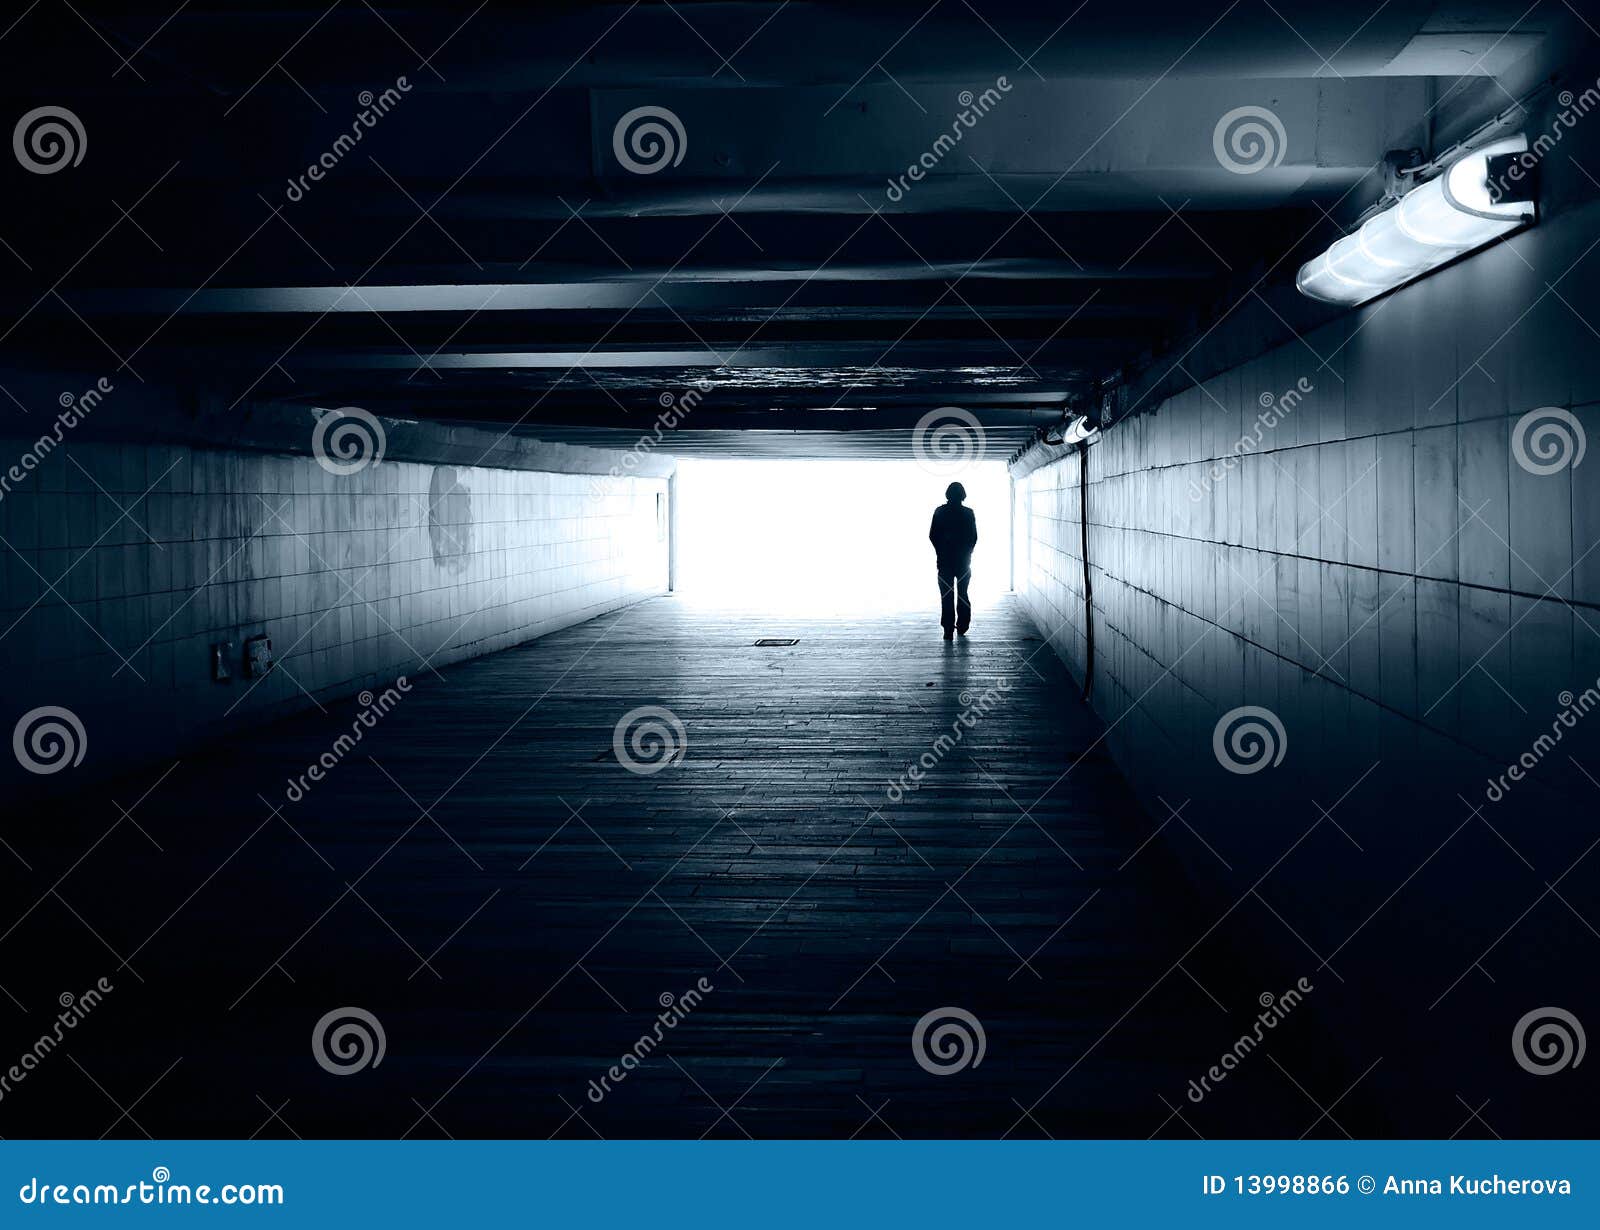 Lonely Silhouette In A Subway Tunnel Stock Photo - Image of lamp ... Silhouette Man Walking Tunnel